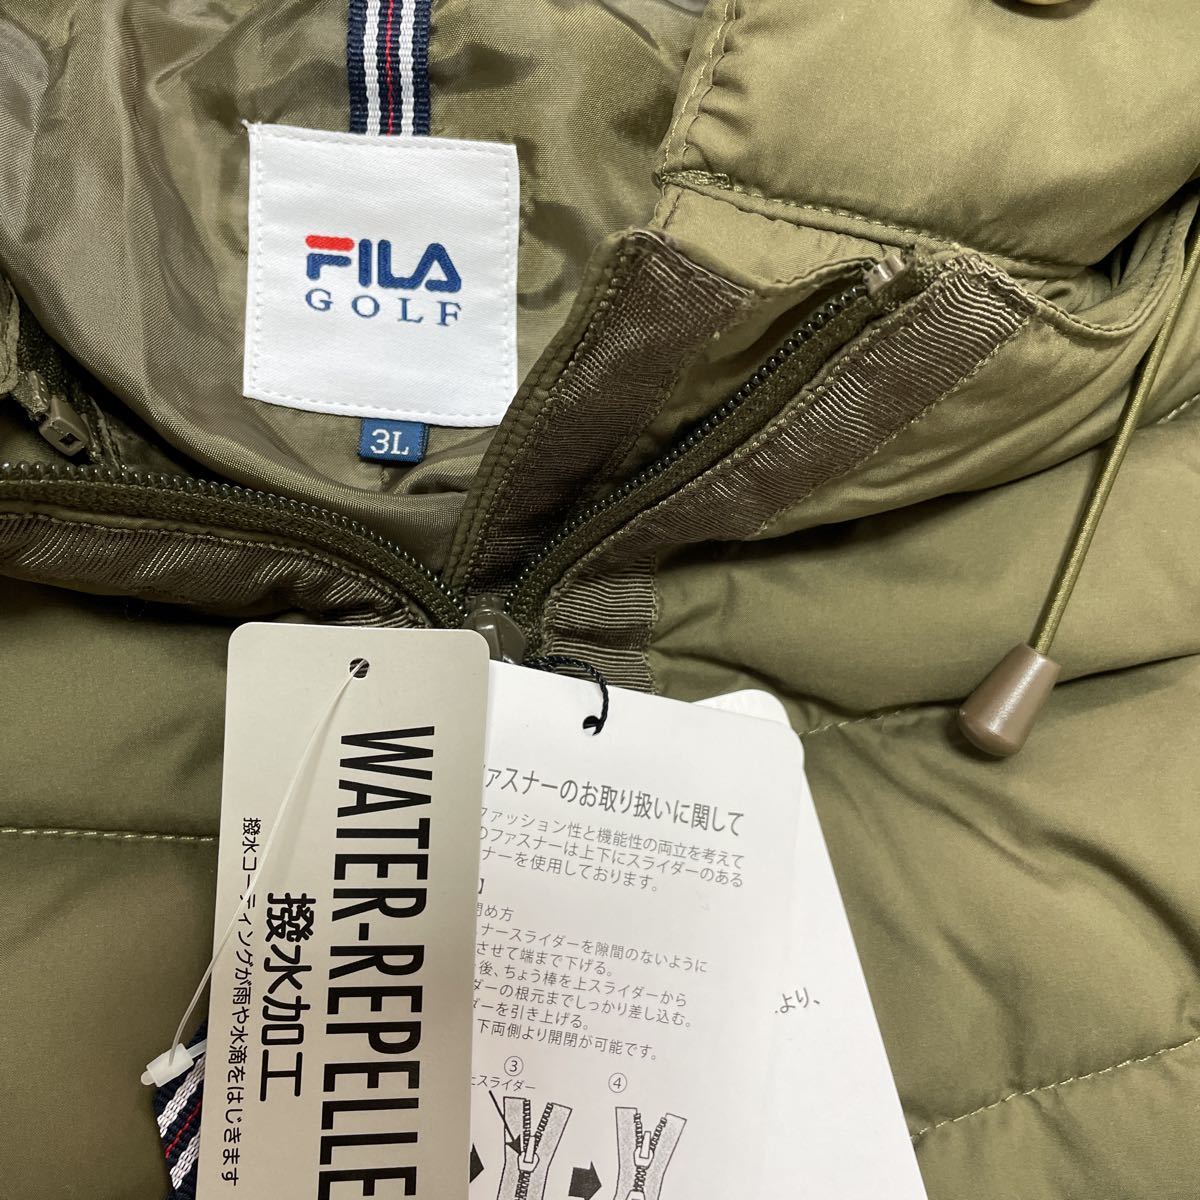  new goods FILA GOLF filler Golf down jacket down coat down coat light weight cloth water-repellent protection against cold khaki size 3L unused regular price 38500 jpy 